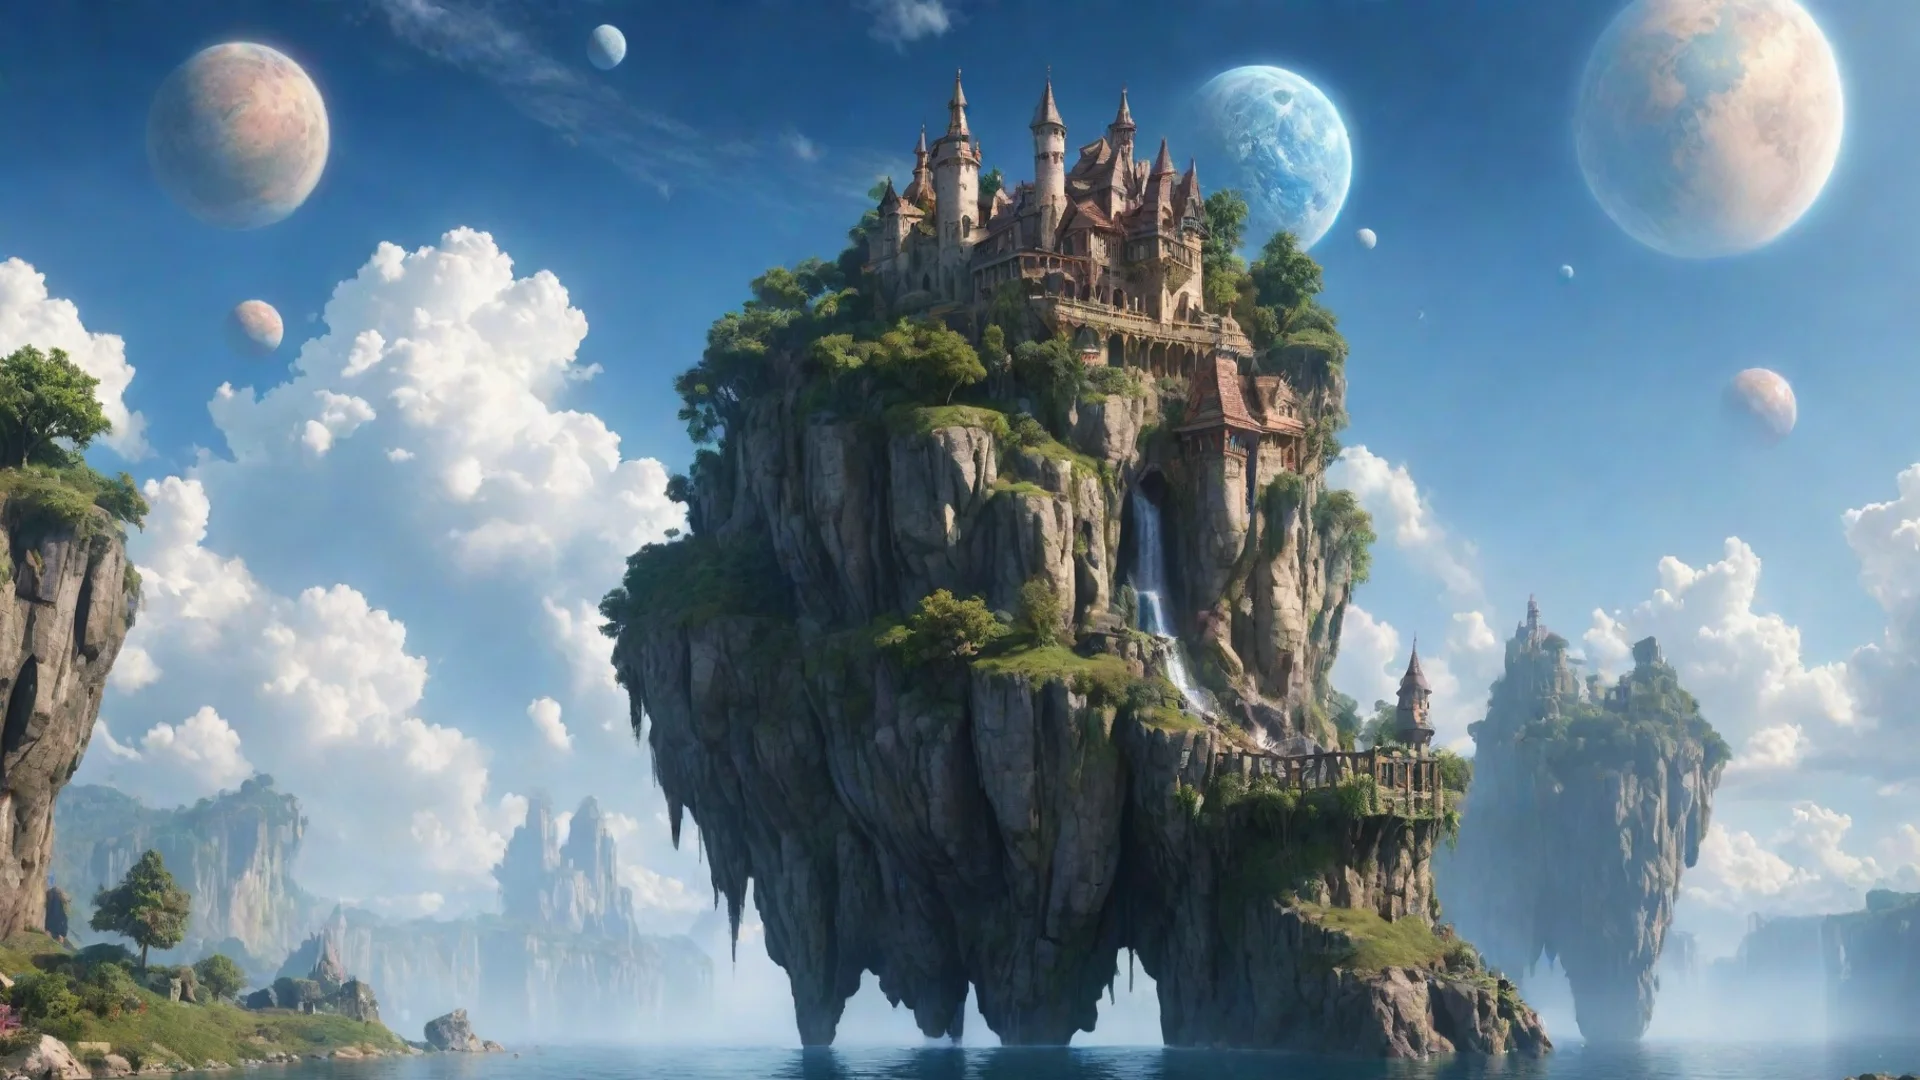 aiamazing peaceful cottage in sky epic floating castle on floating cliffs with waterfalls down beautiful sky with planets awesome portrait 2 wide